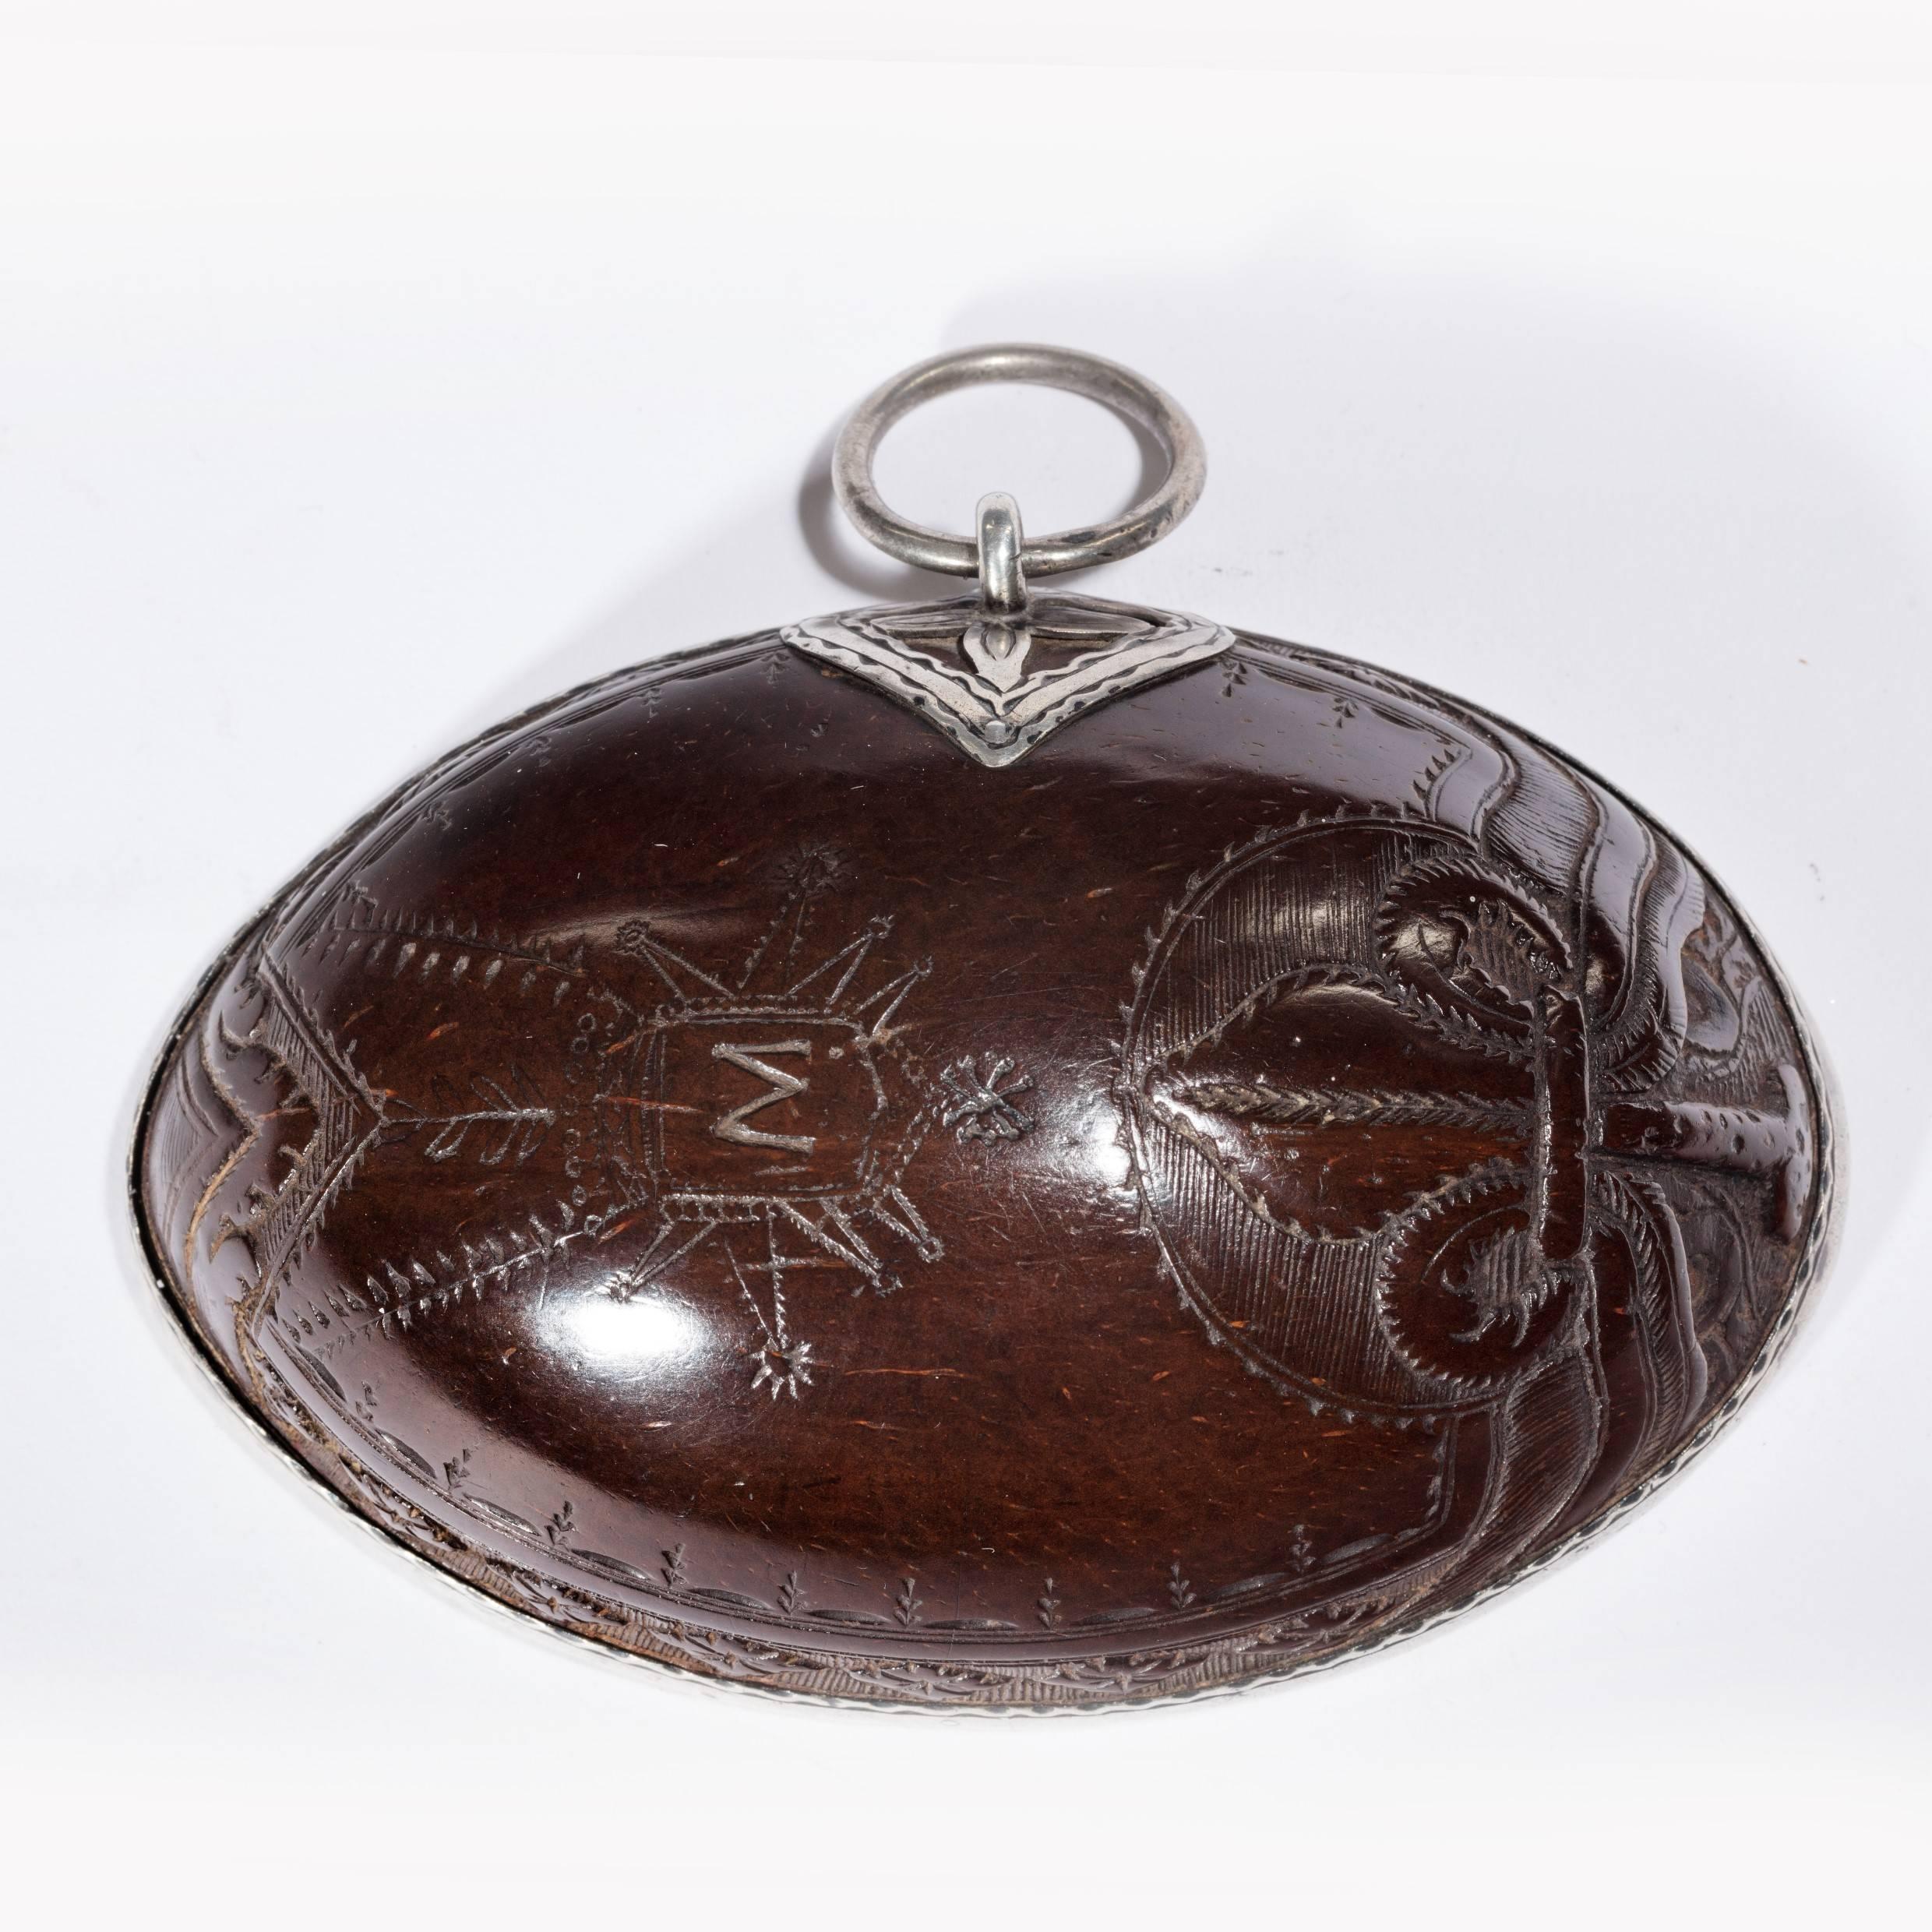 A Portuguese colonial coconut shell scoop made from half a coconut with silver mounts and attachment ring, incised with a fleur de lys and the initial ‘M’ in a shield, circa 1800.